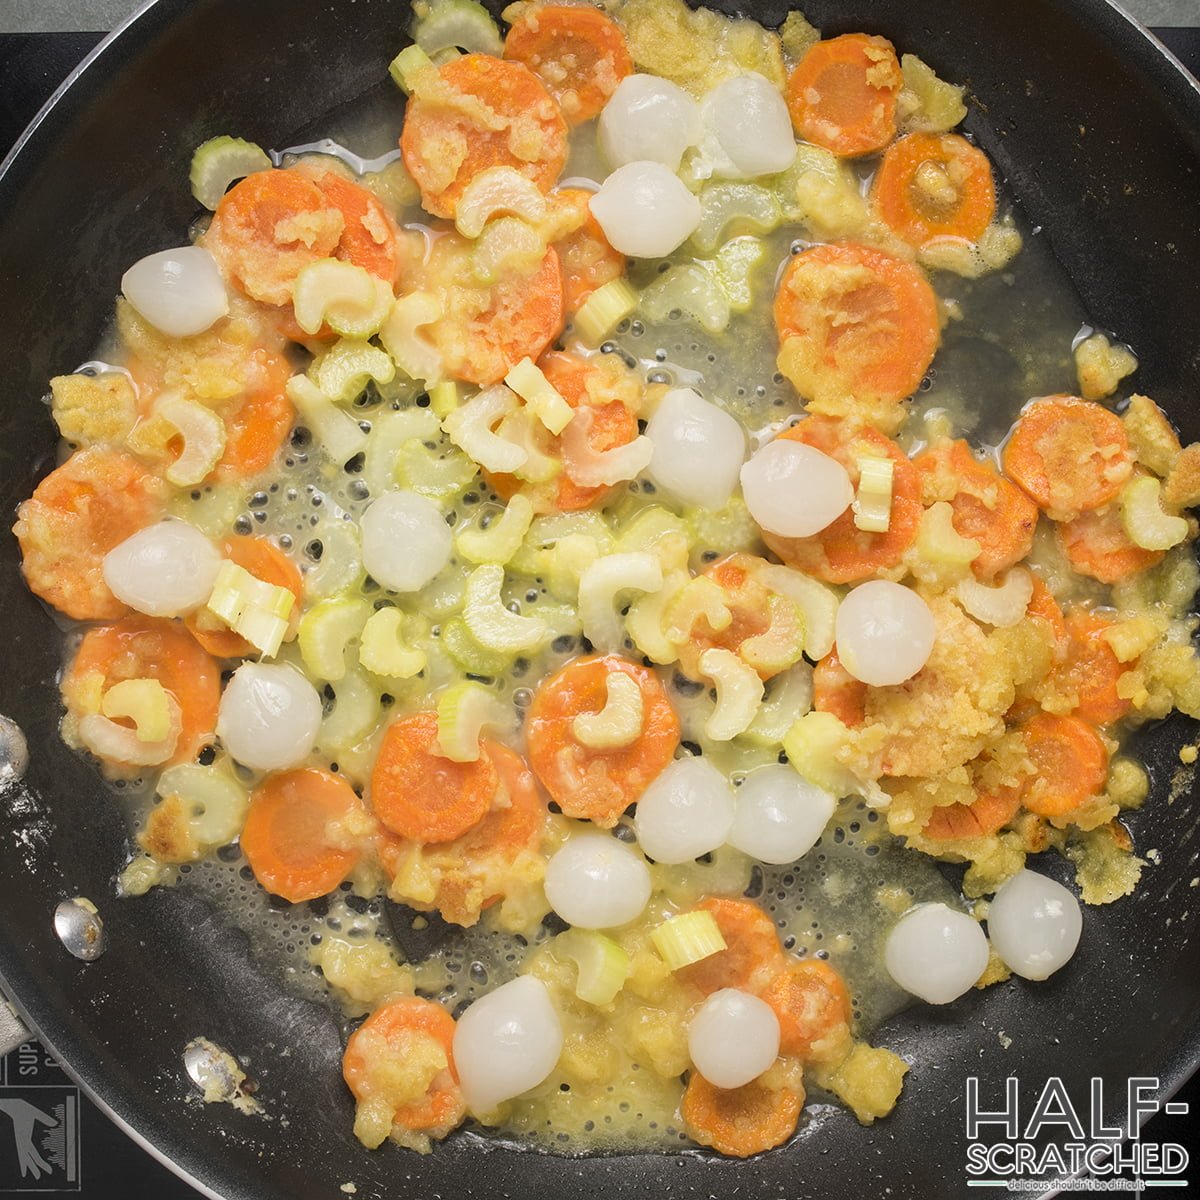 Cooking the vegetables in frying pan